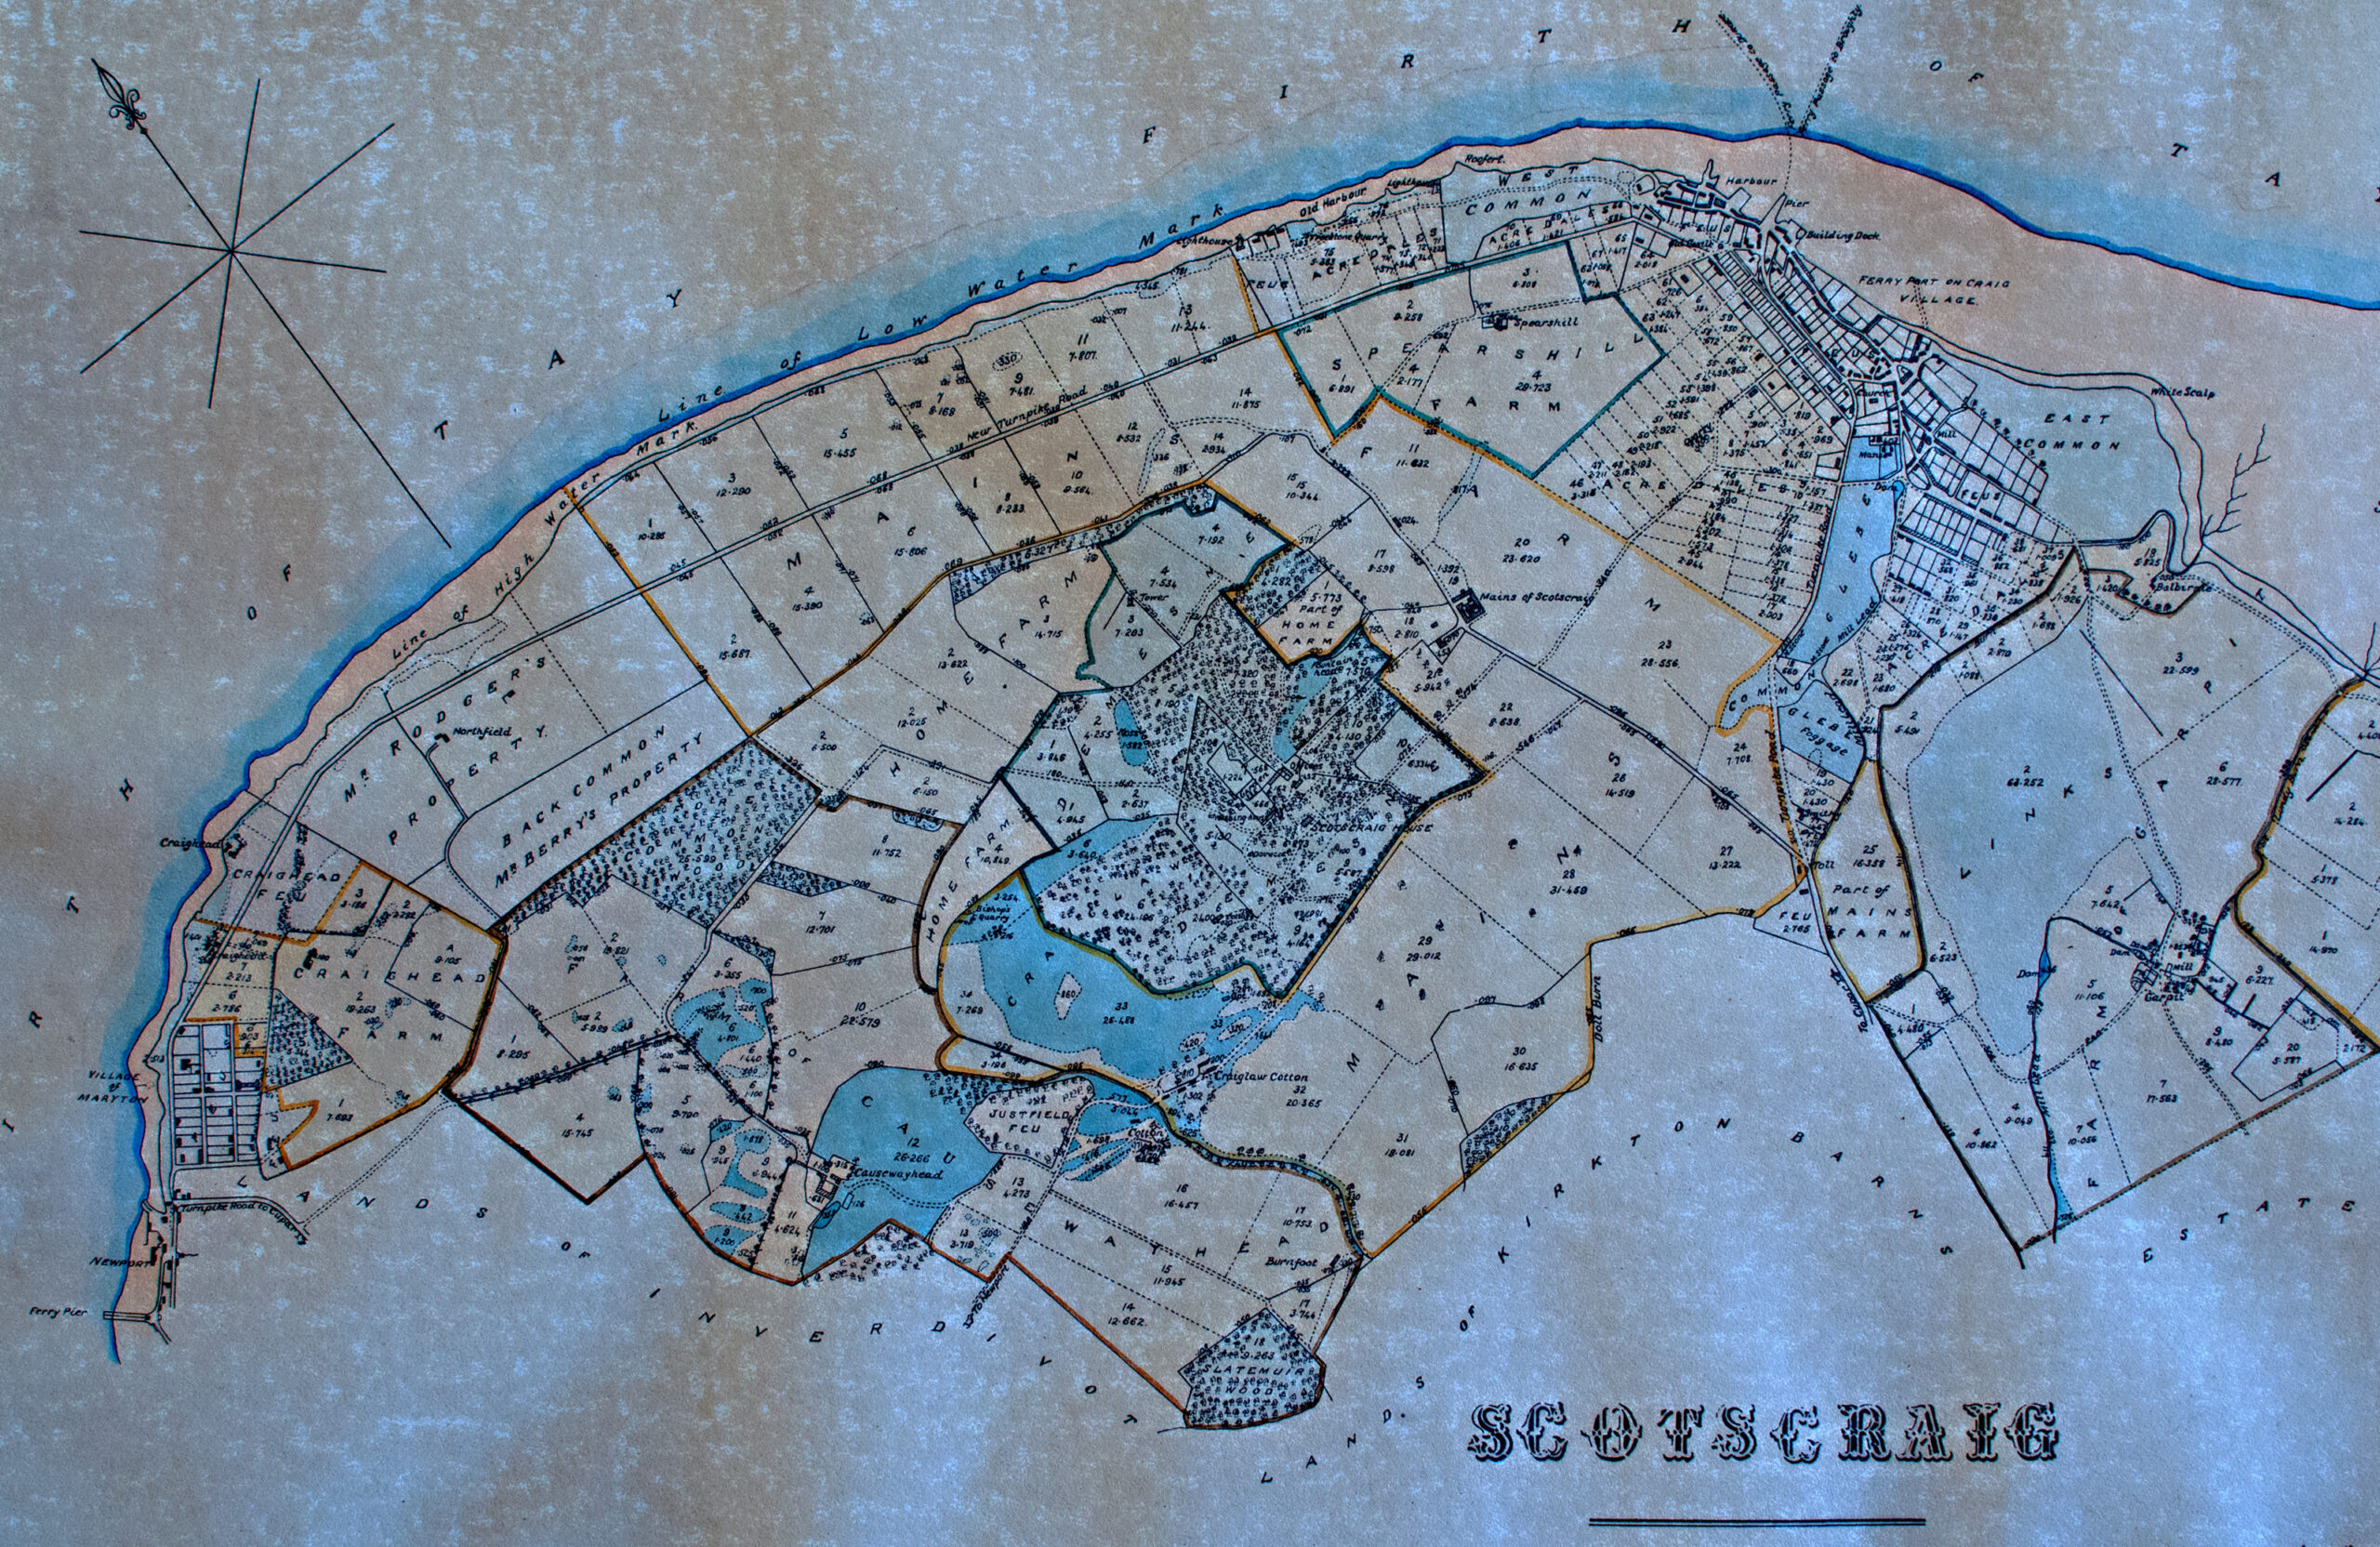 Tayport Heritage Trail - Board 13 - 1831 Scotscraig Estate map reflects the 3 water courses on 1769 map of the village